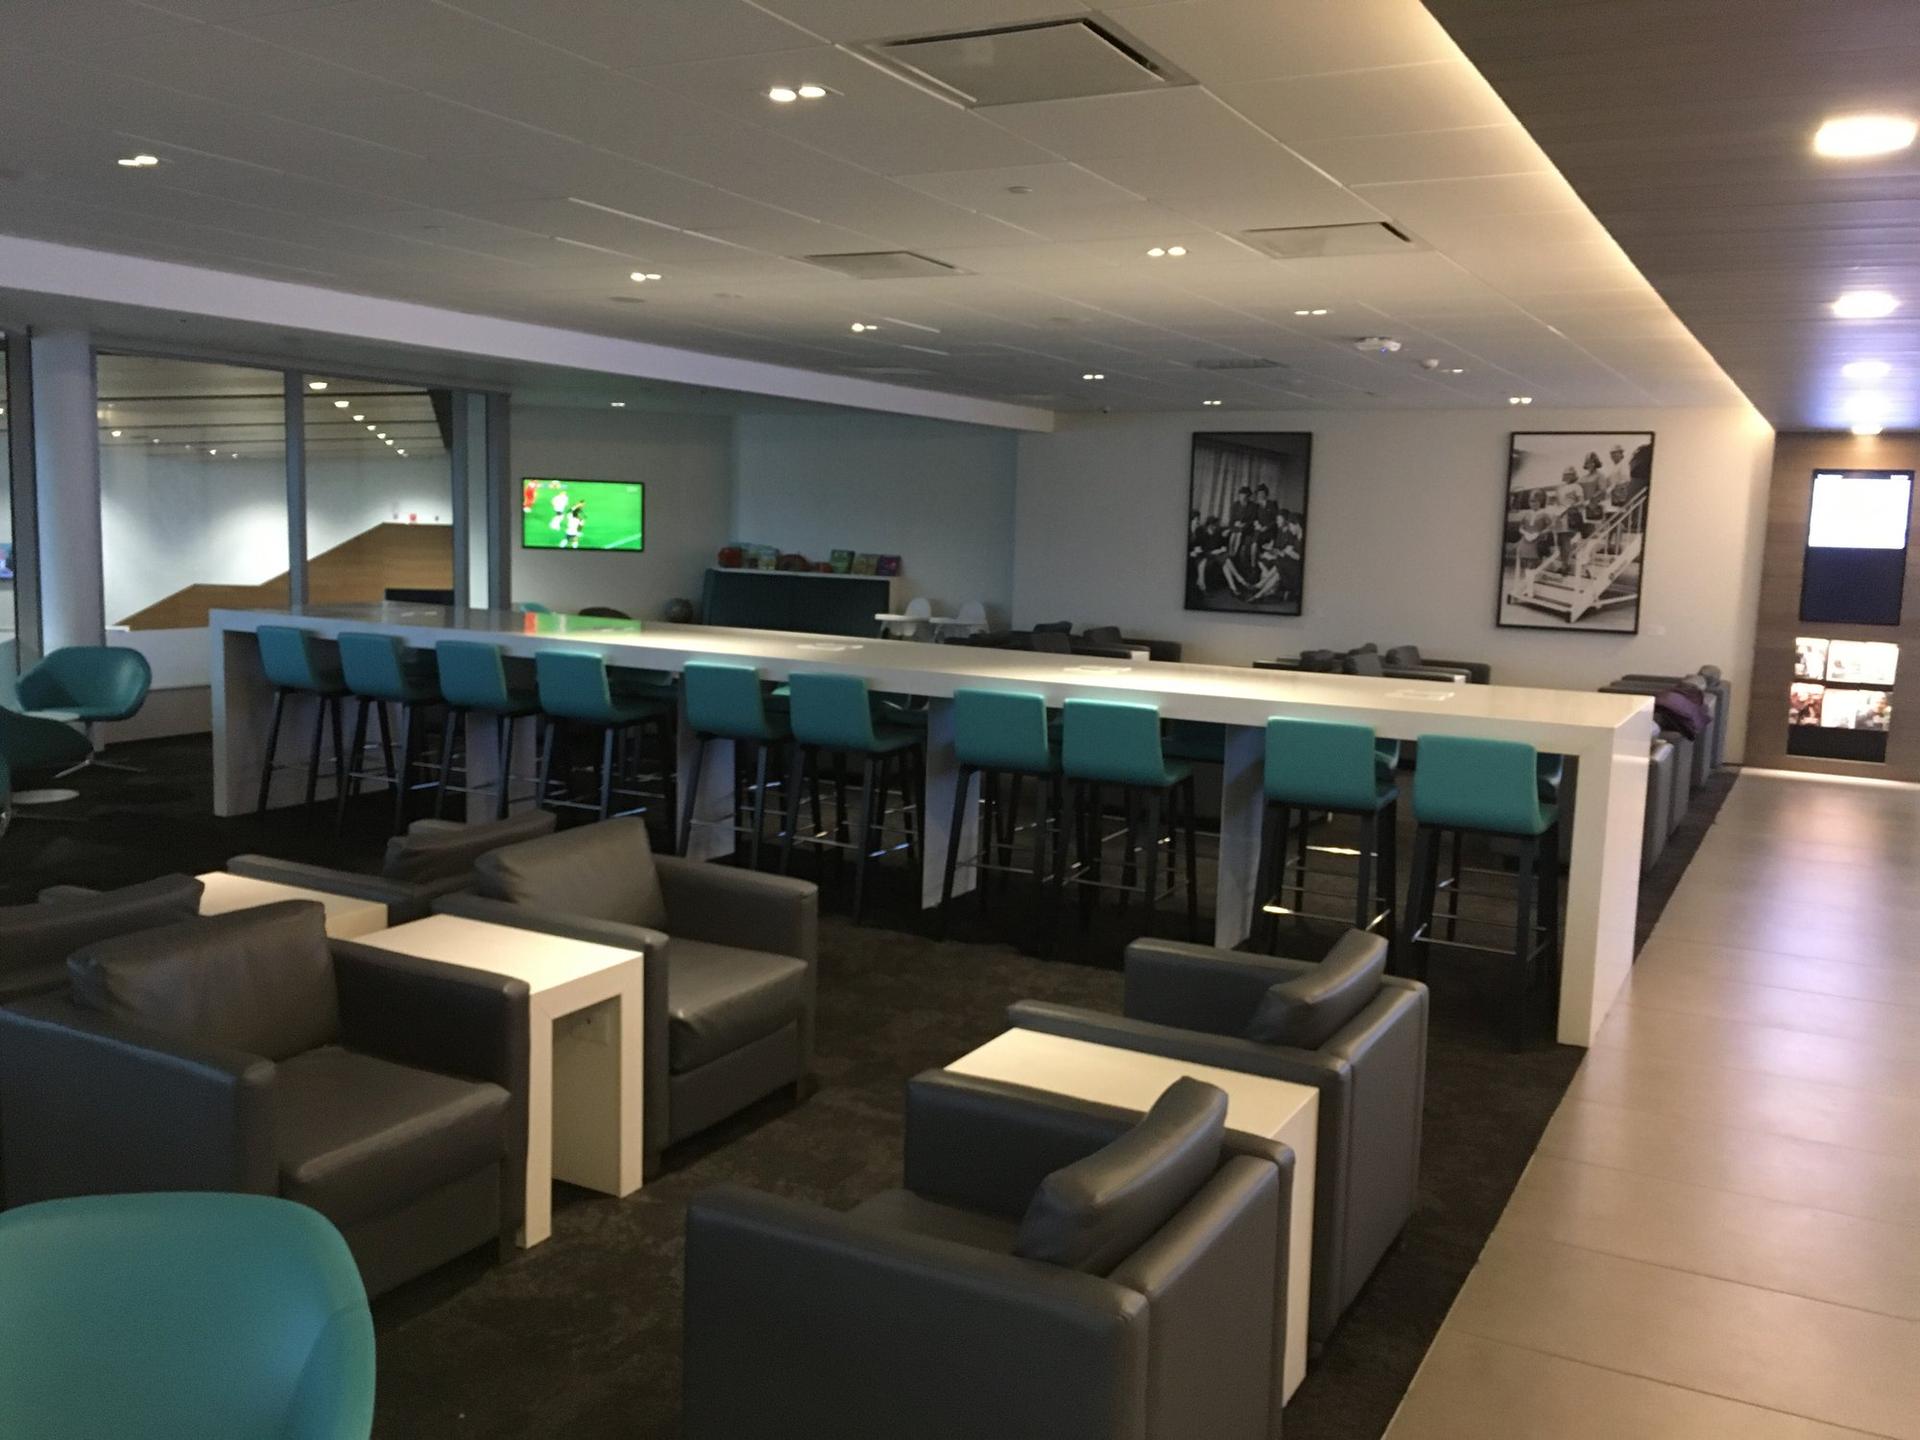 Air New Zealand Regional Lounge image 5 of 7